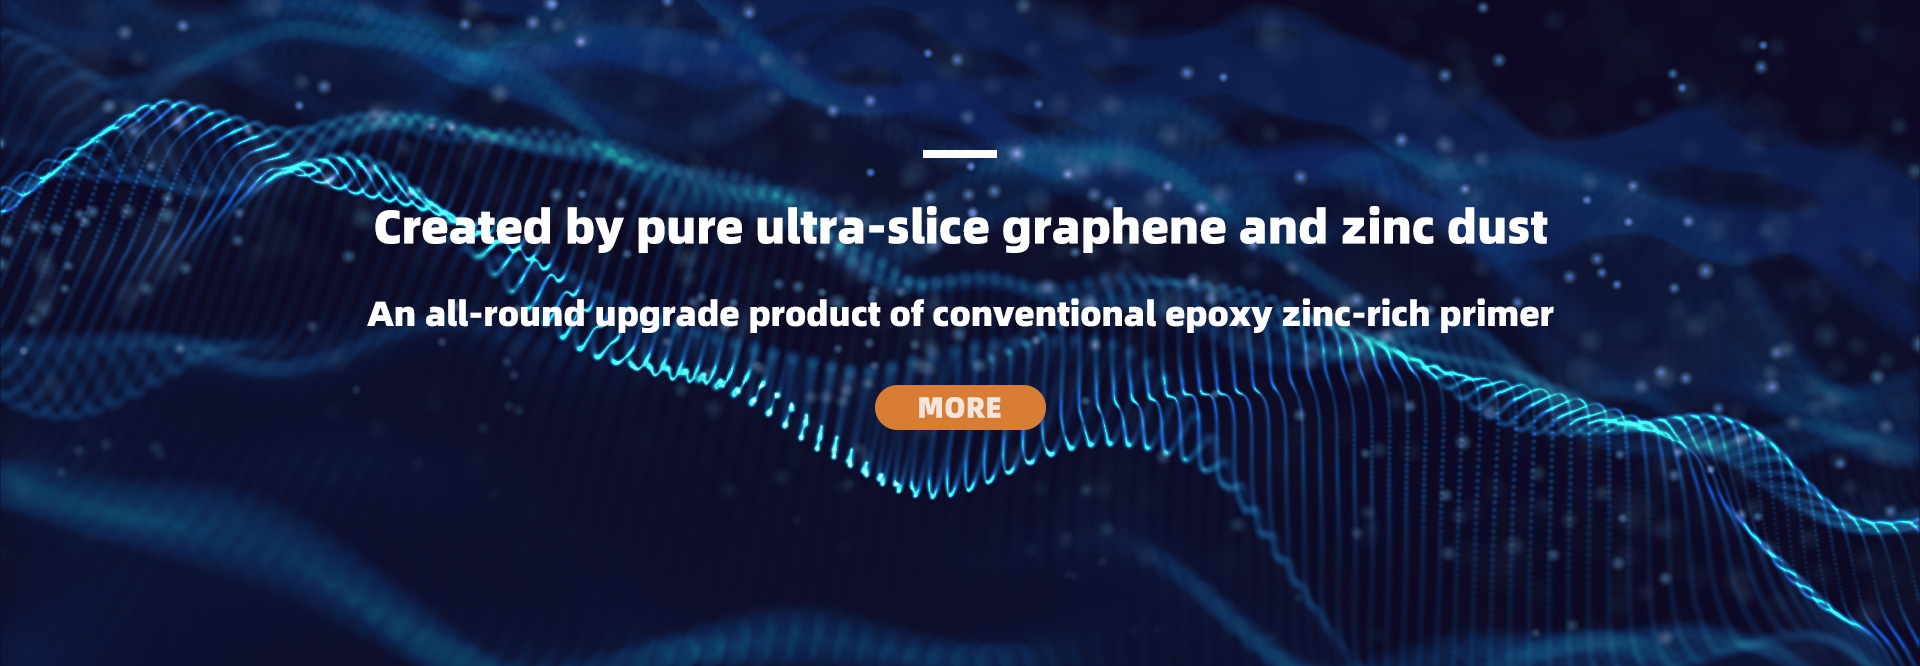 Created by pure ultra-slice graphene and zinc dust